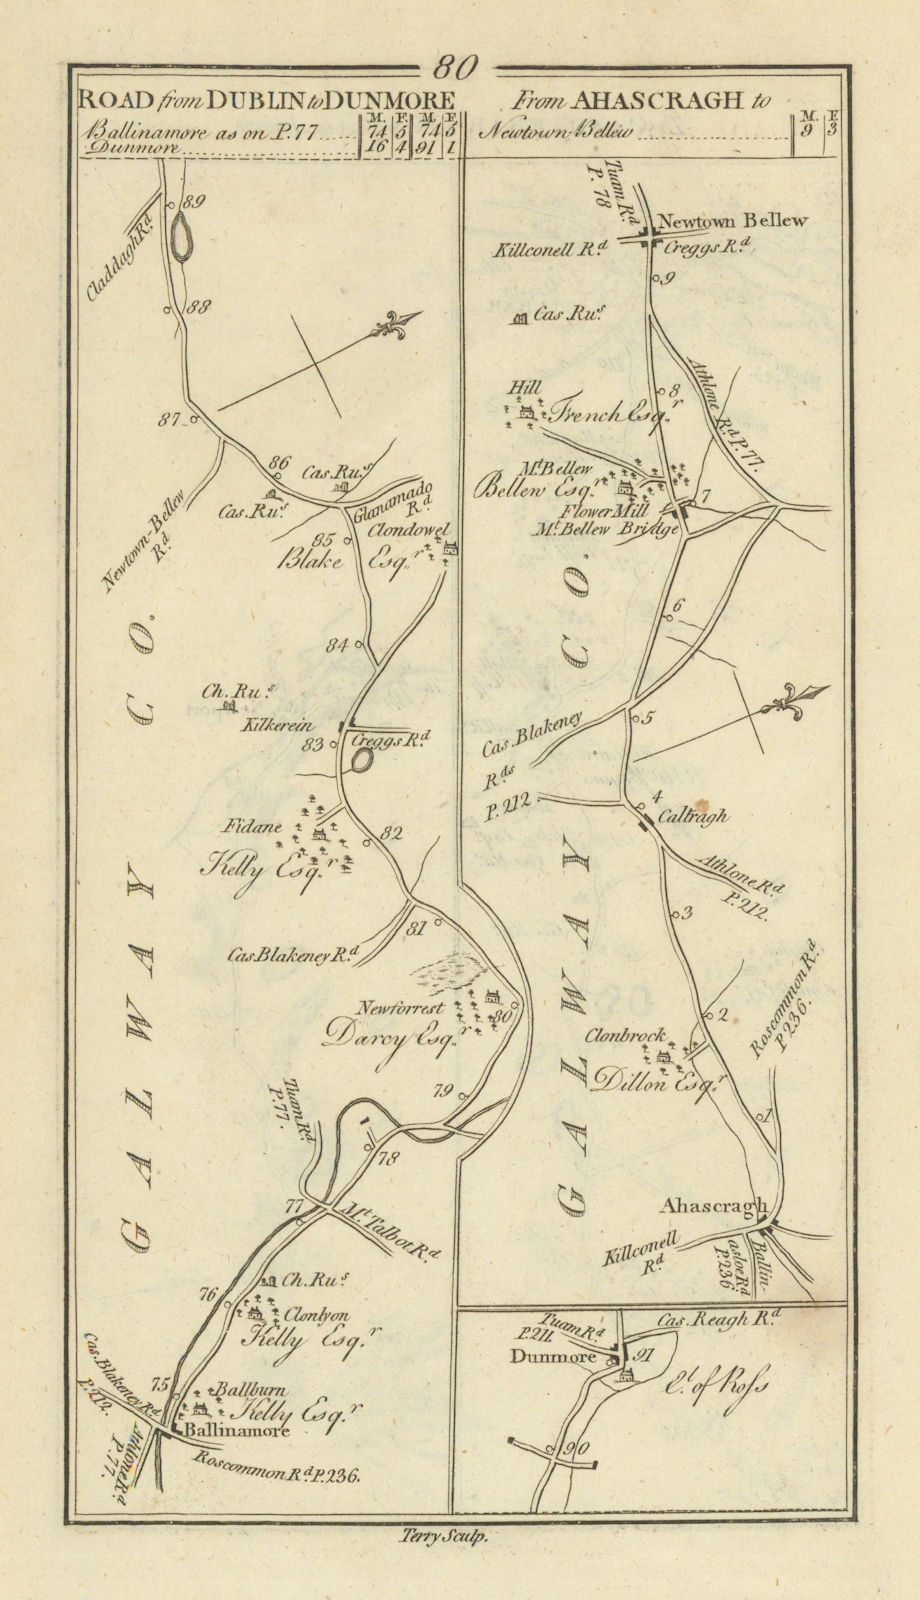 Associate Product #80 Ahascragh to Moylough. Ballinamore Mountbellew. TAYLOR/SKINNER 1778 map